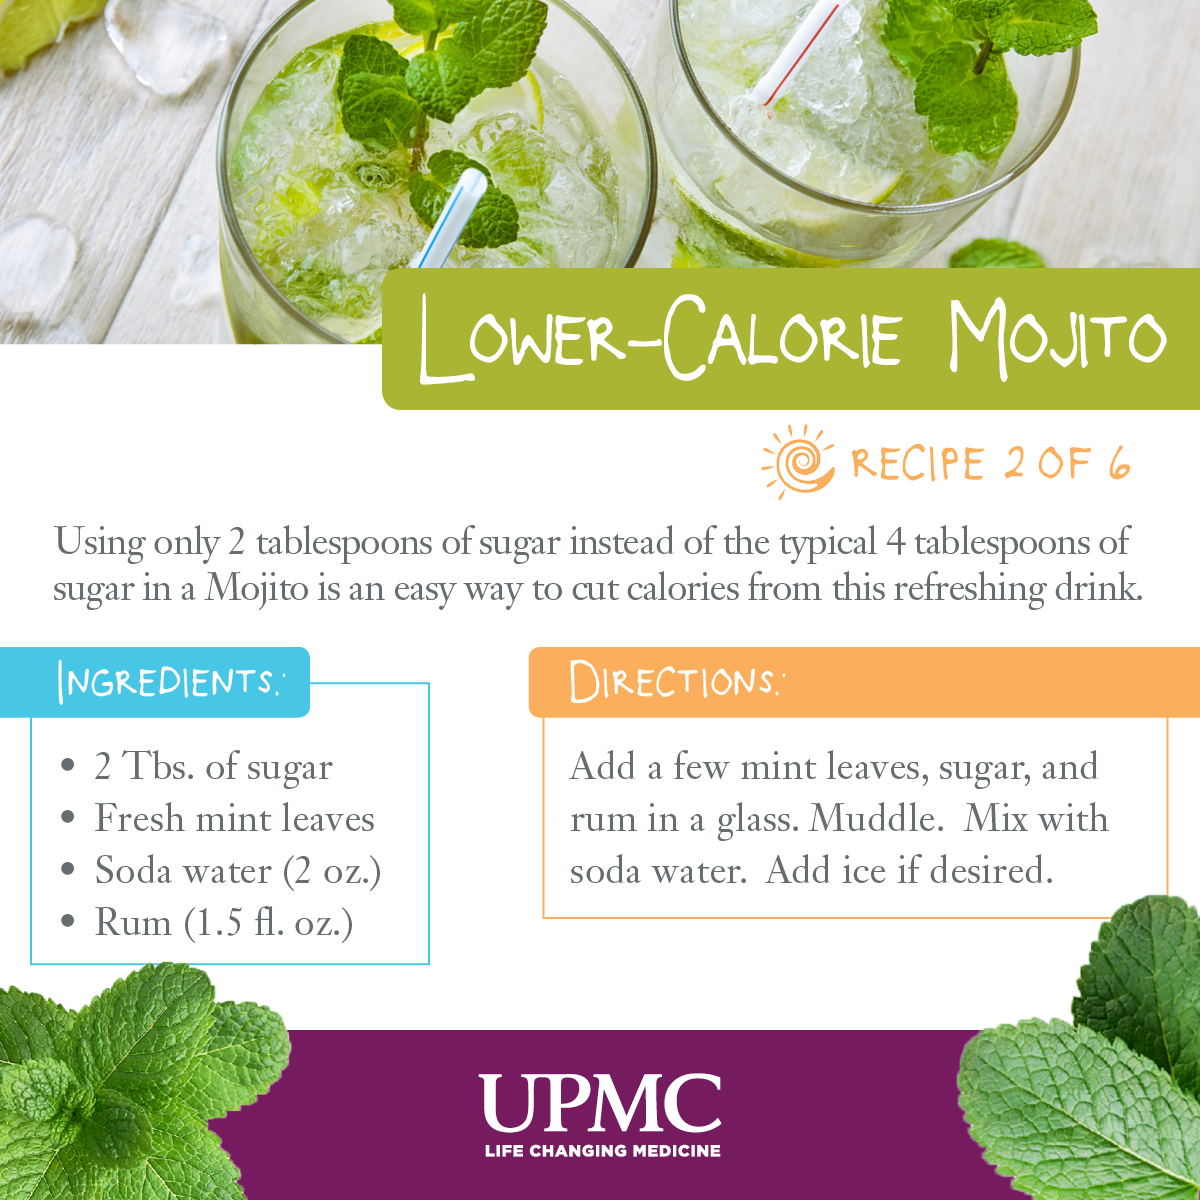 Learn how to make this low-calorie mojito recipe